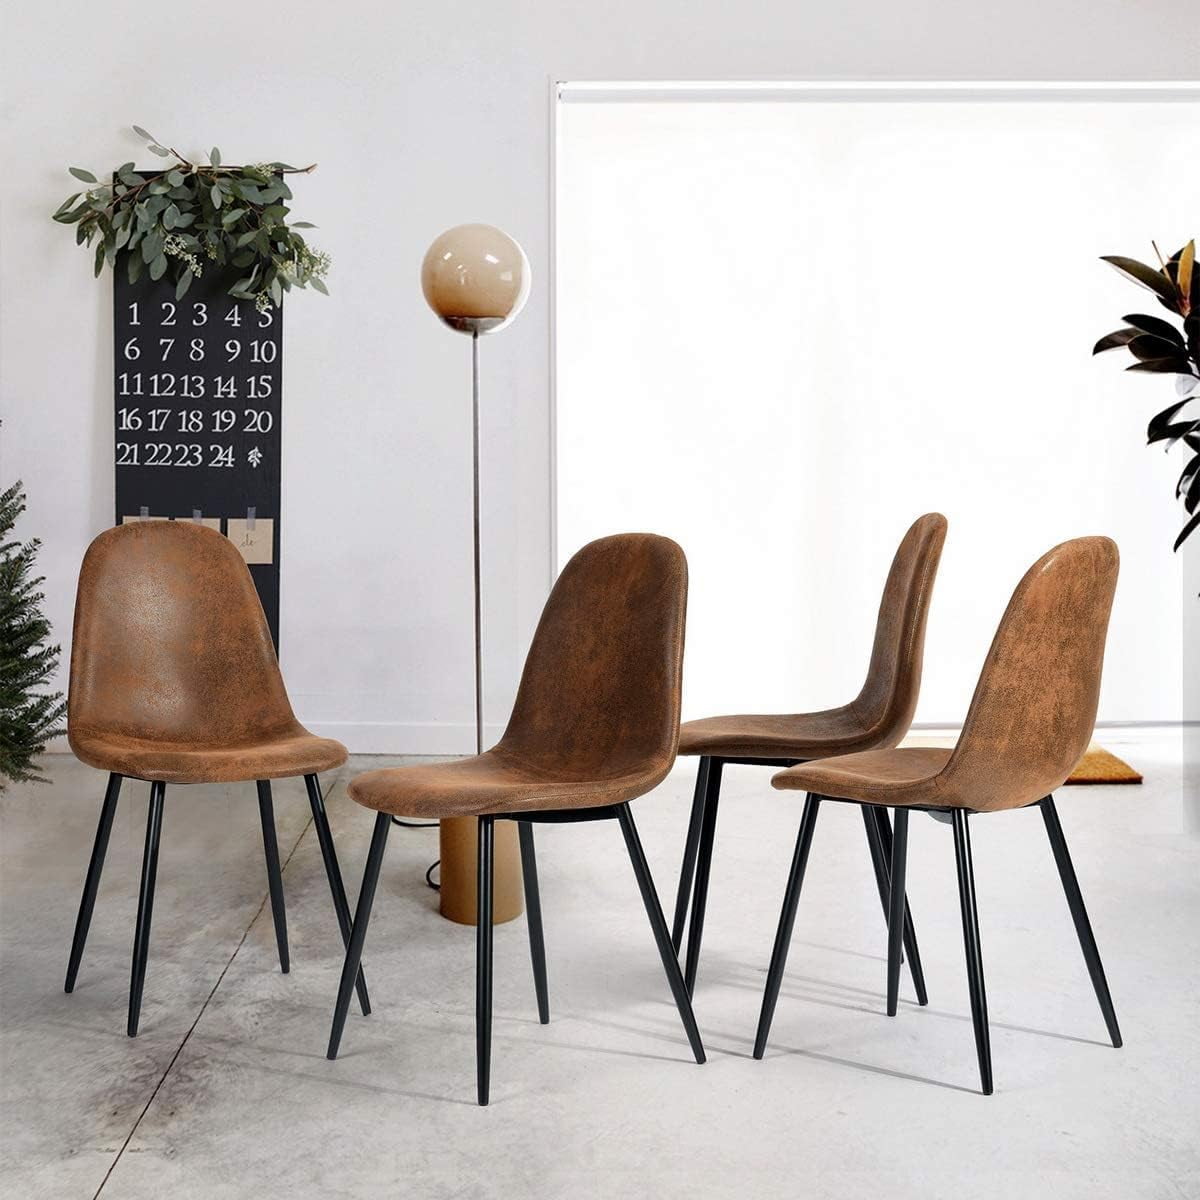 Highsound Dining Chairs Set of 4, Mid-Century Suede Fabric Dining